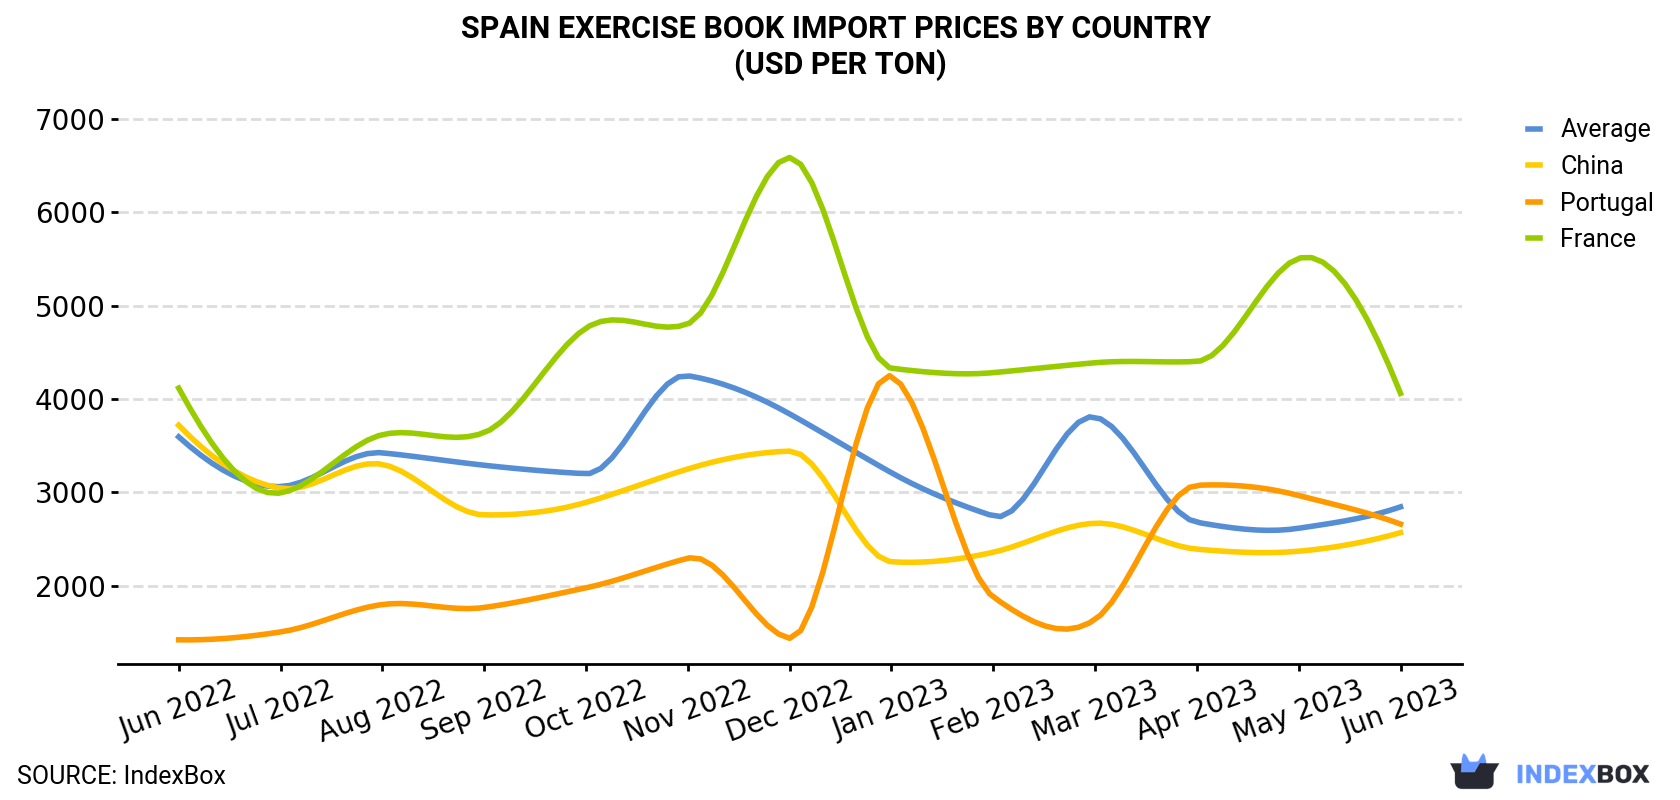 Spain Exercise Book Import Prices By Country (USD Per Ton)